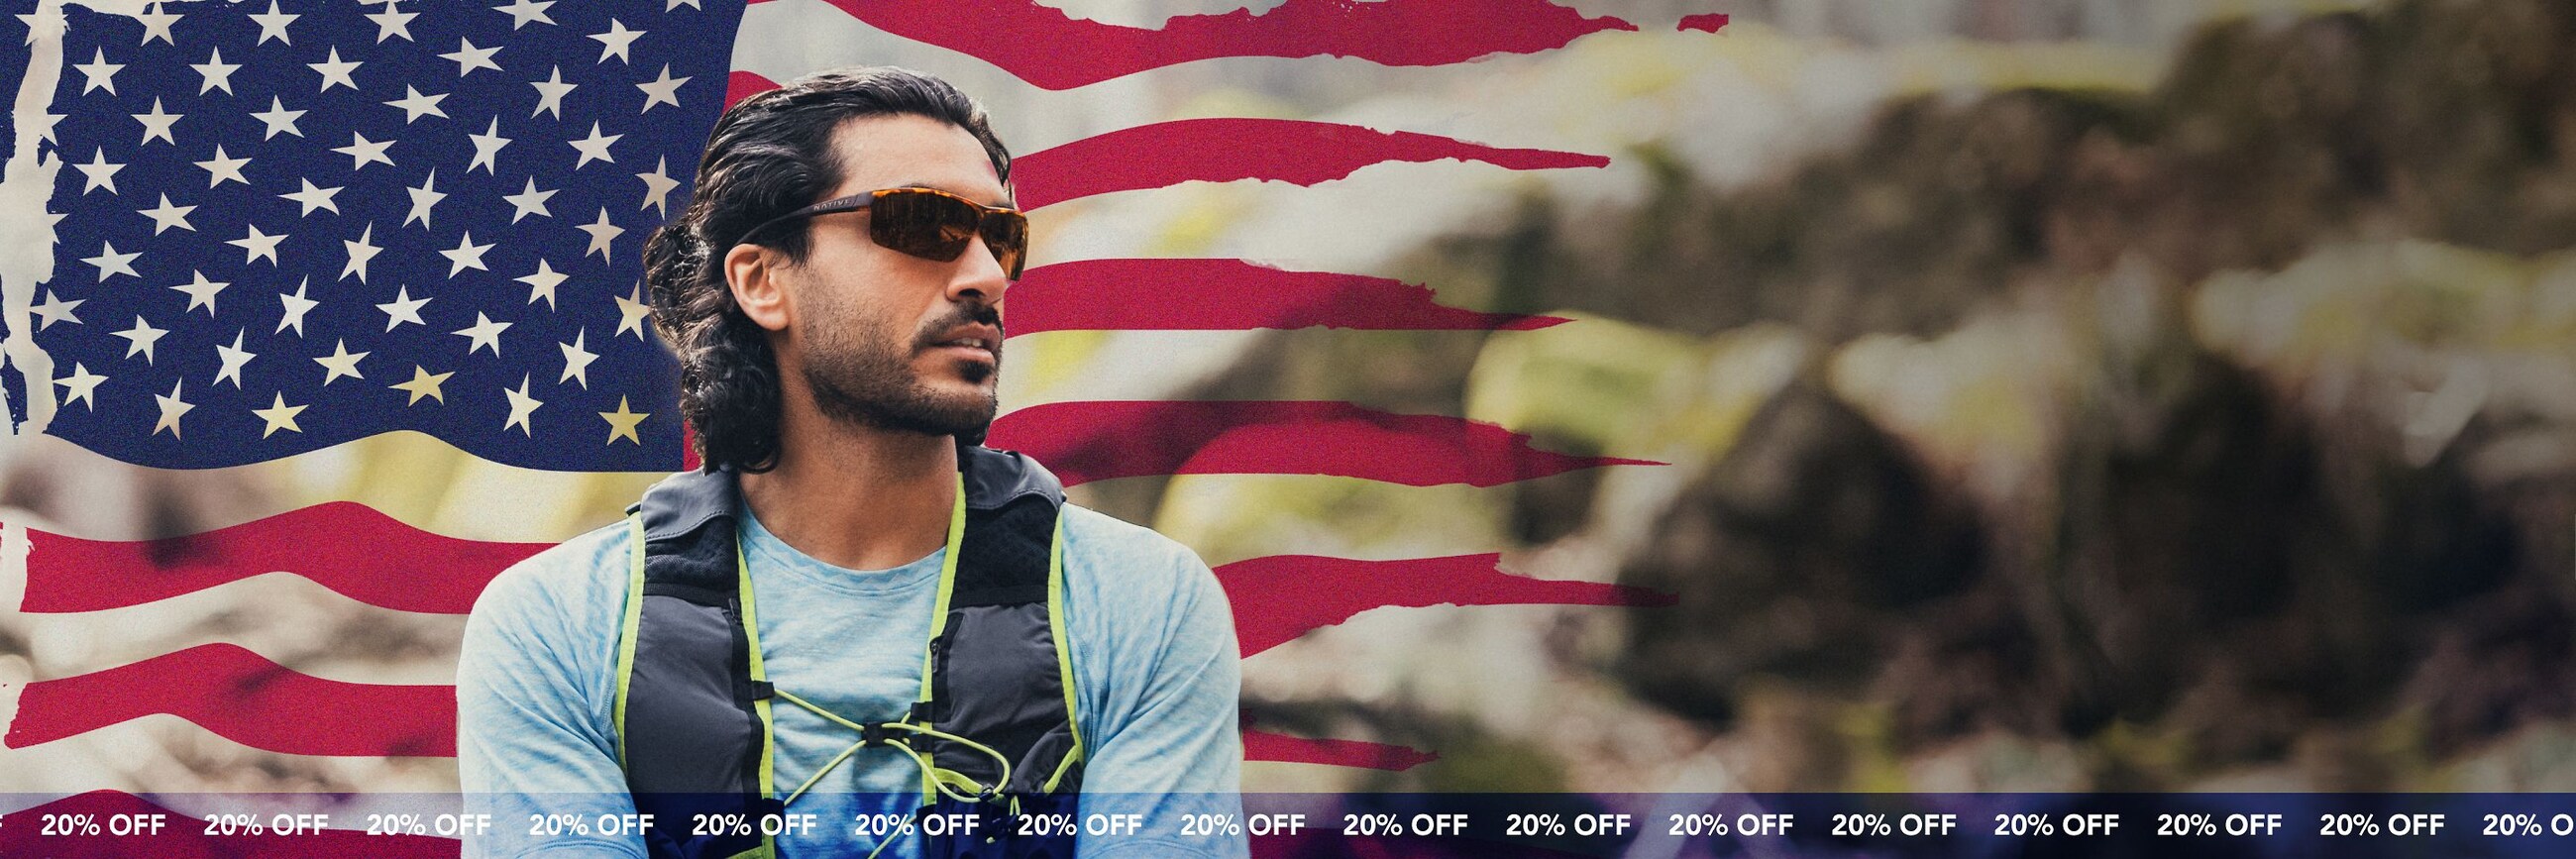 GET YOUR SUMMER ADVENTURES ROLLING-Kickstart your summer plans with 20% OFF select sunglasses. Valid through 5/29.